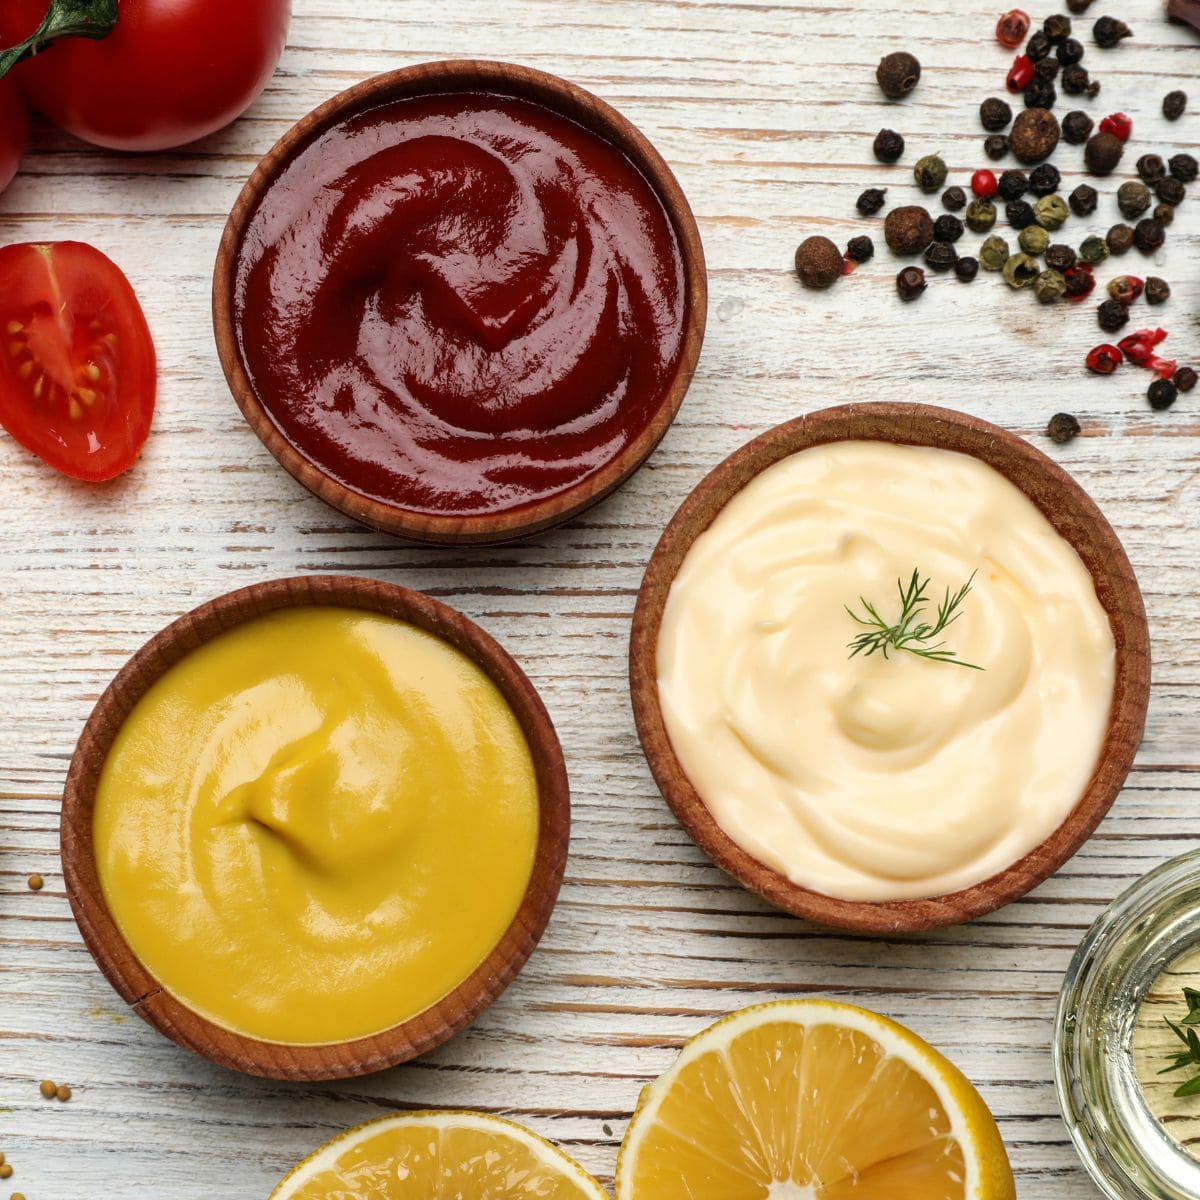 ketchup, mustard, and mayo in small brown bowls from above.